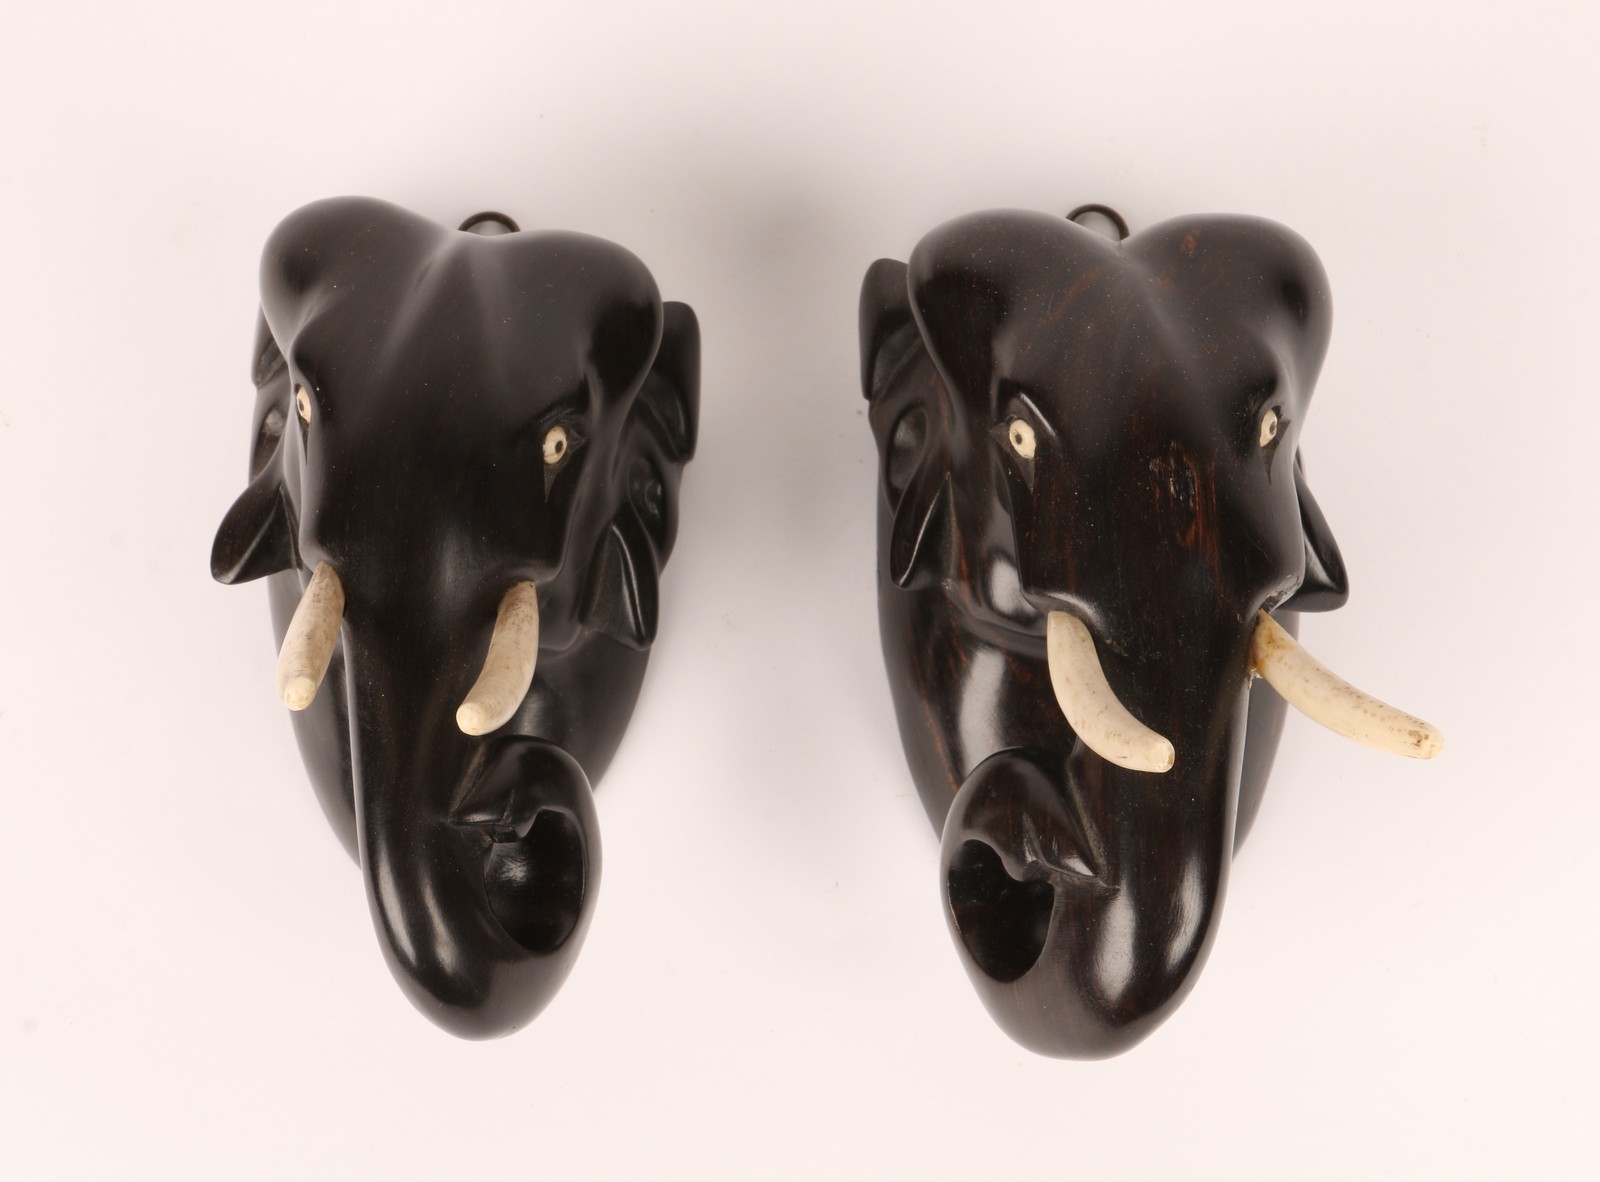 A PAIR OF CARVED EBONY WALL PLAQUES in the form of elephant heads, 13cm high